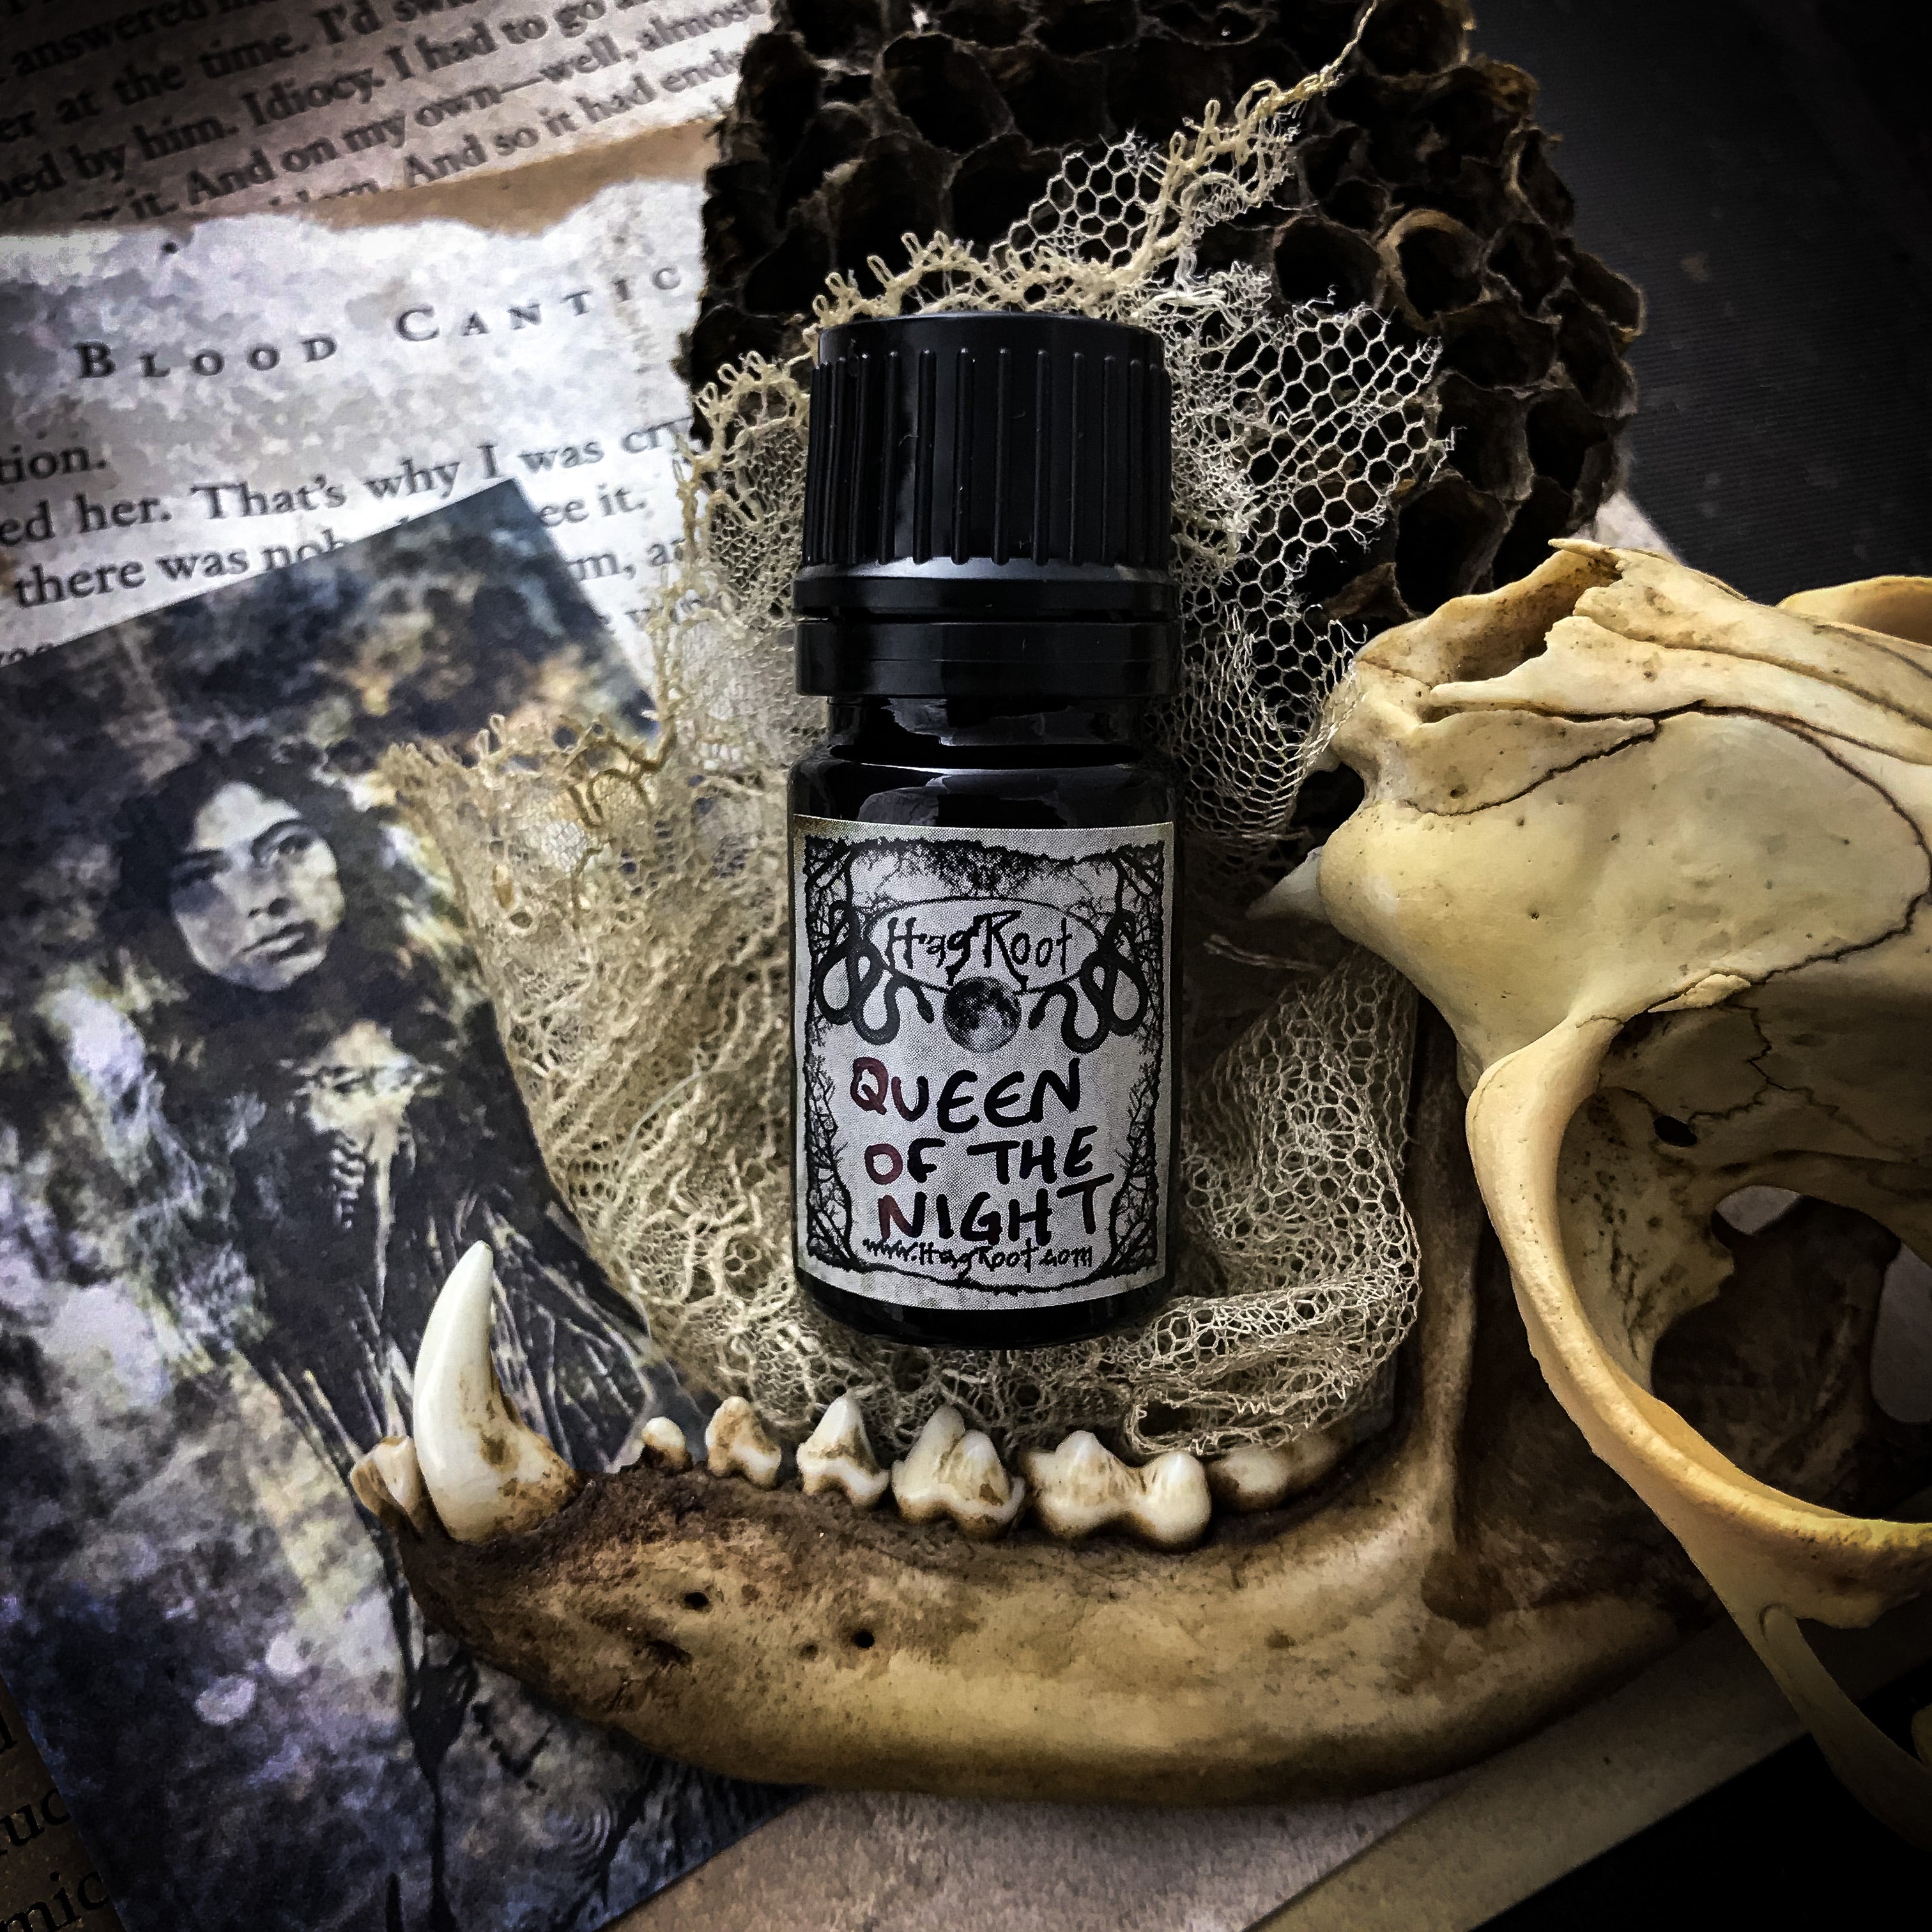 QUEEN OF THE NIGHT-(Dark Chocolate, Blood Orange, Frankincense Tears, Dark Spices, Forest)-Perfume, Cologne, Anointing, Ritual Oil